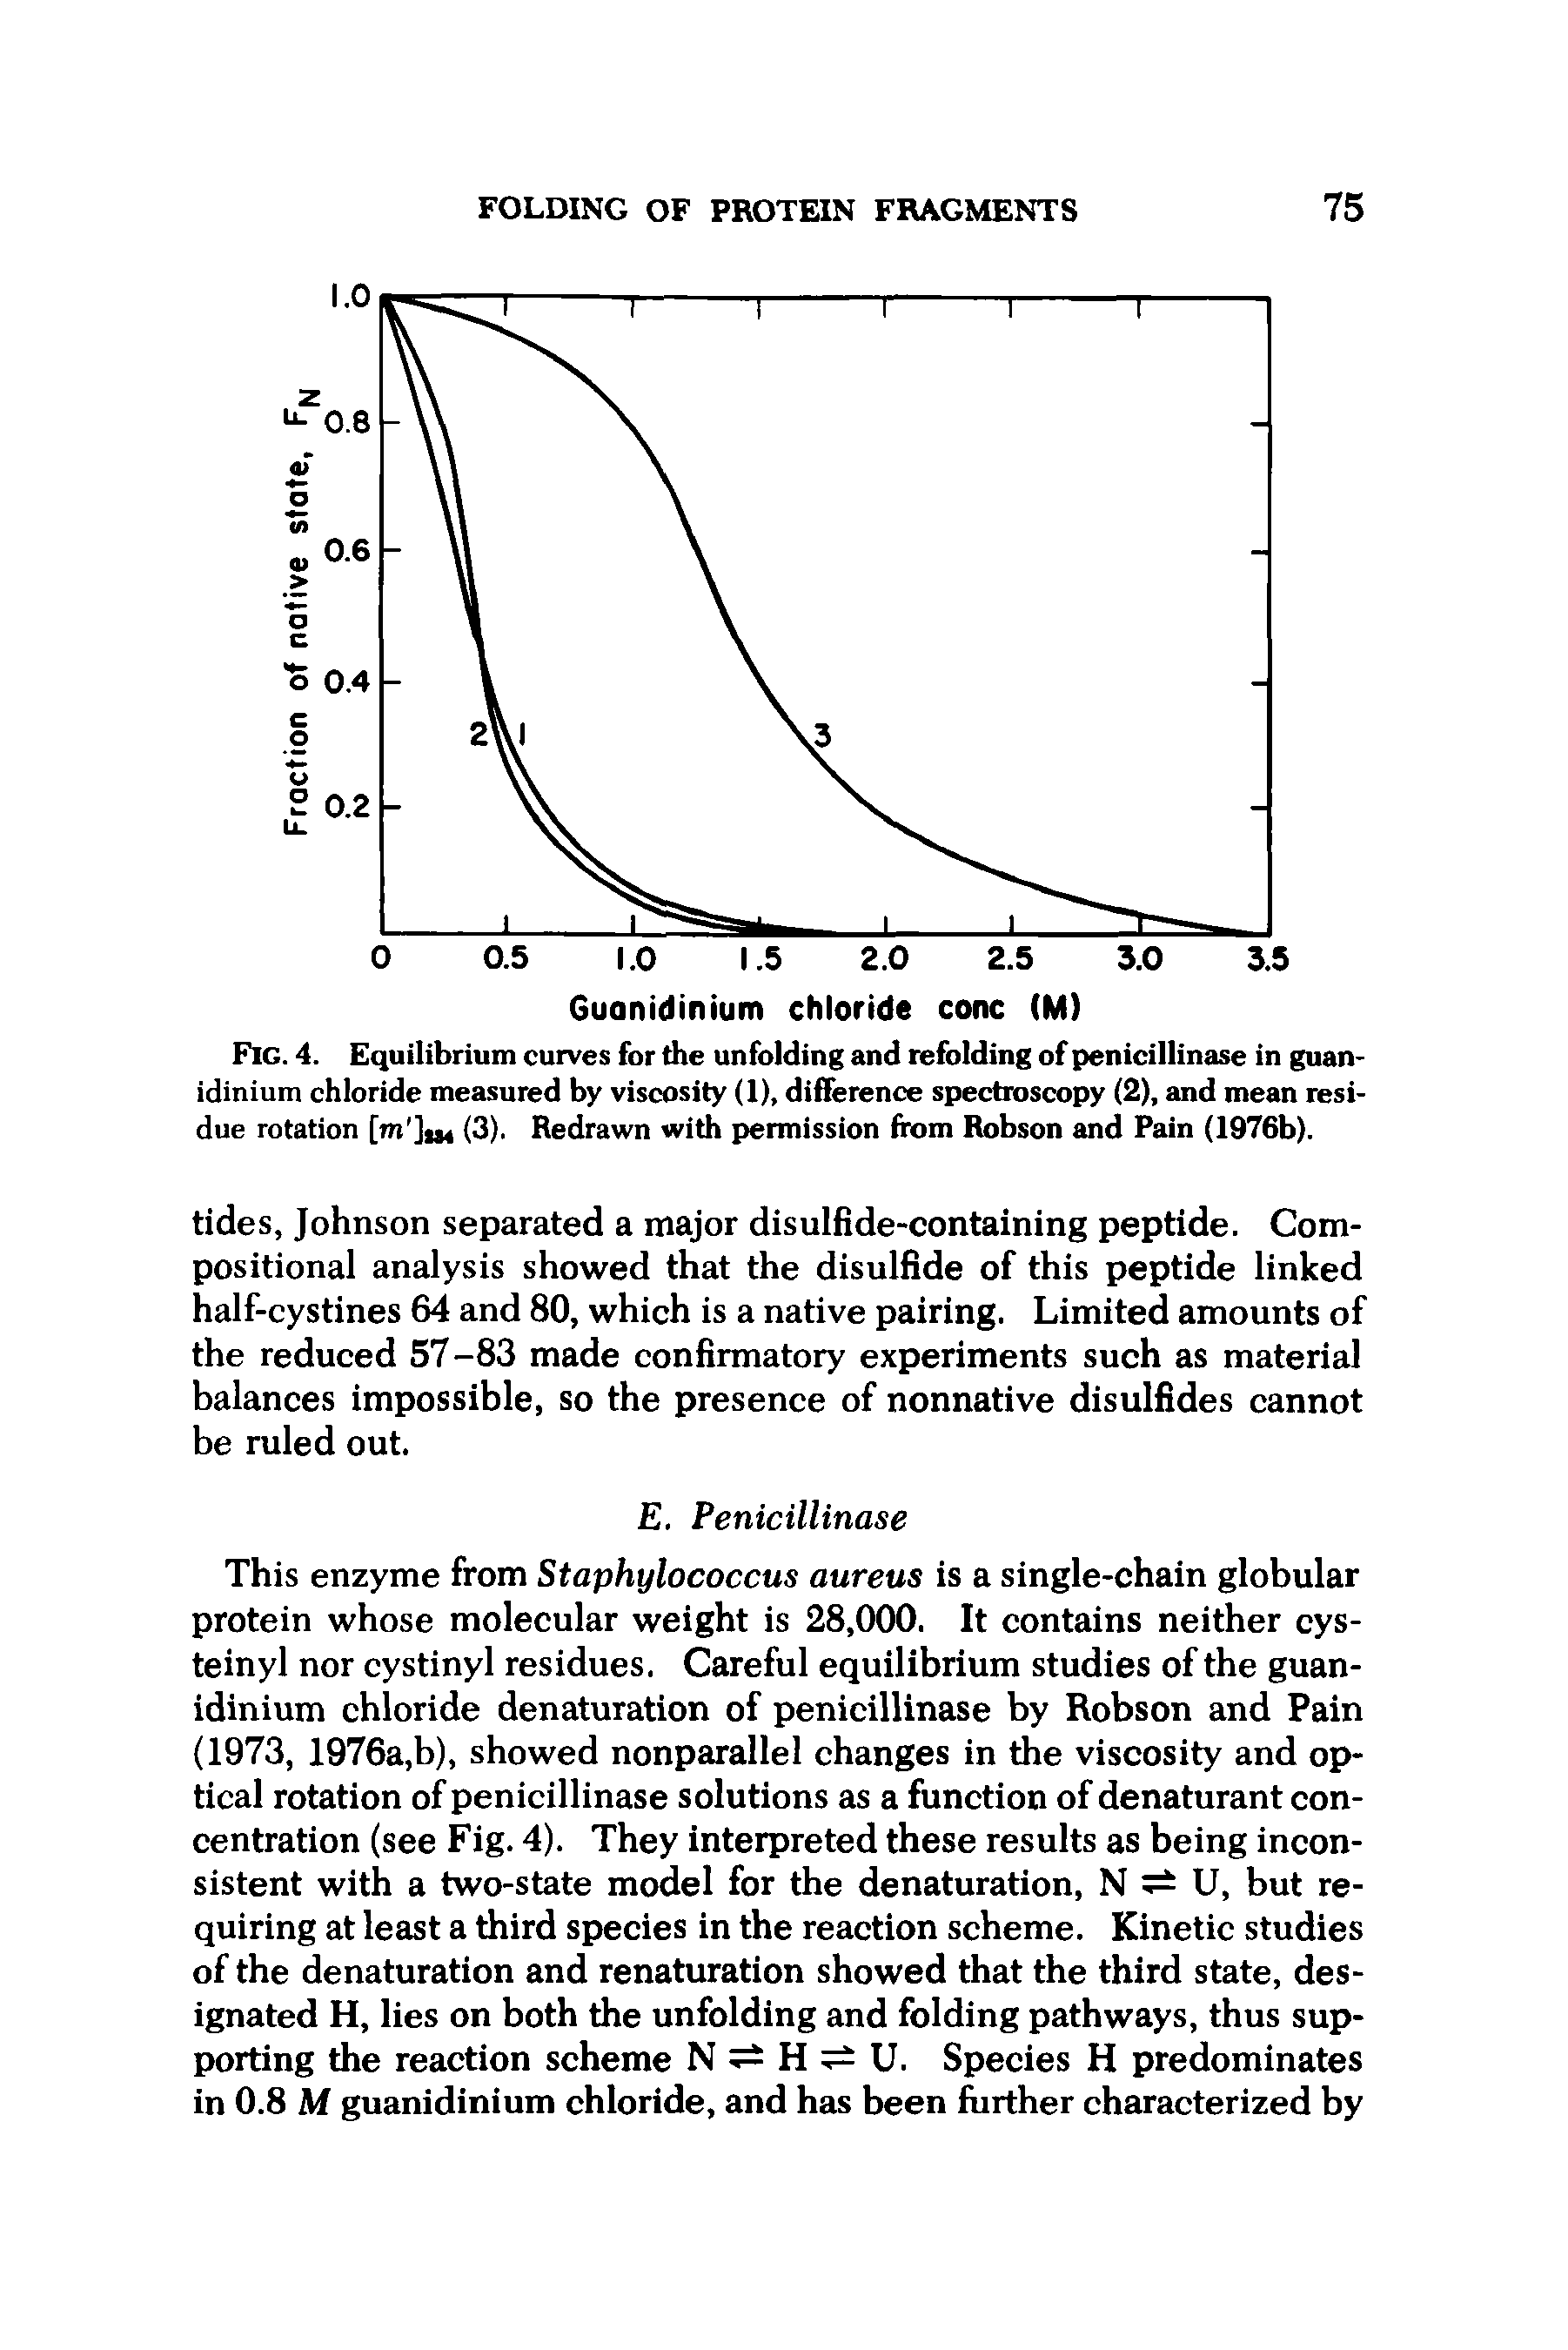 Fig. 4. Equilibrium curves for the unfolding and refolding of penicillinase in guanidinium chloride measured by viscosity (1), difference spectroscopy (2), and mean residue rotation [m jiM (3). Redrawn with permission from Robson and Pain (1976b).